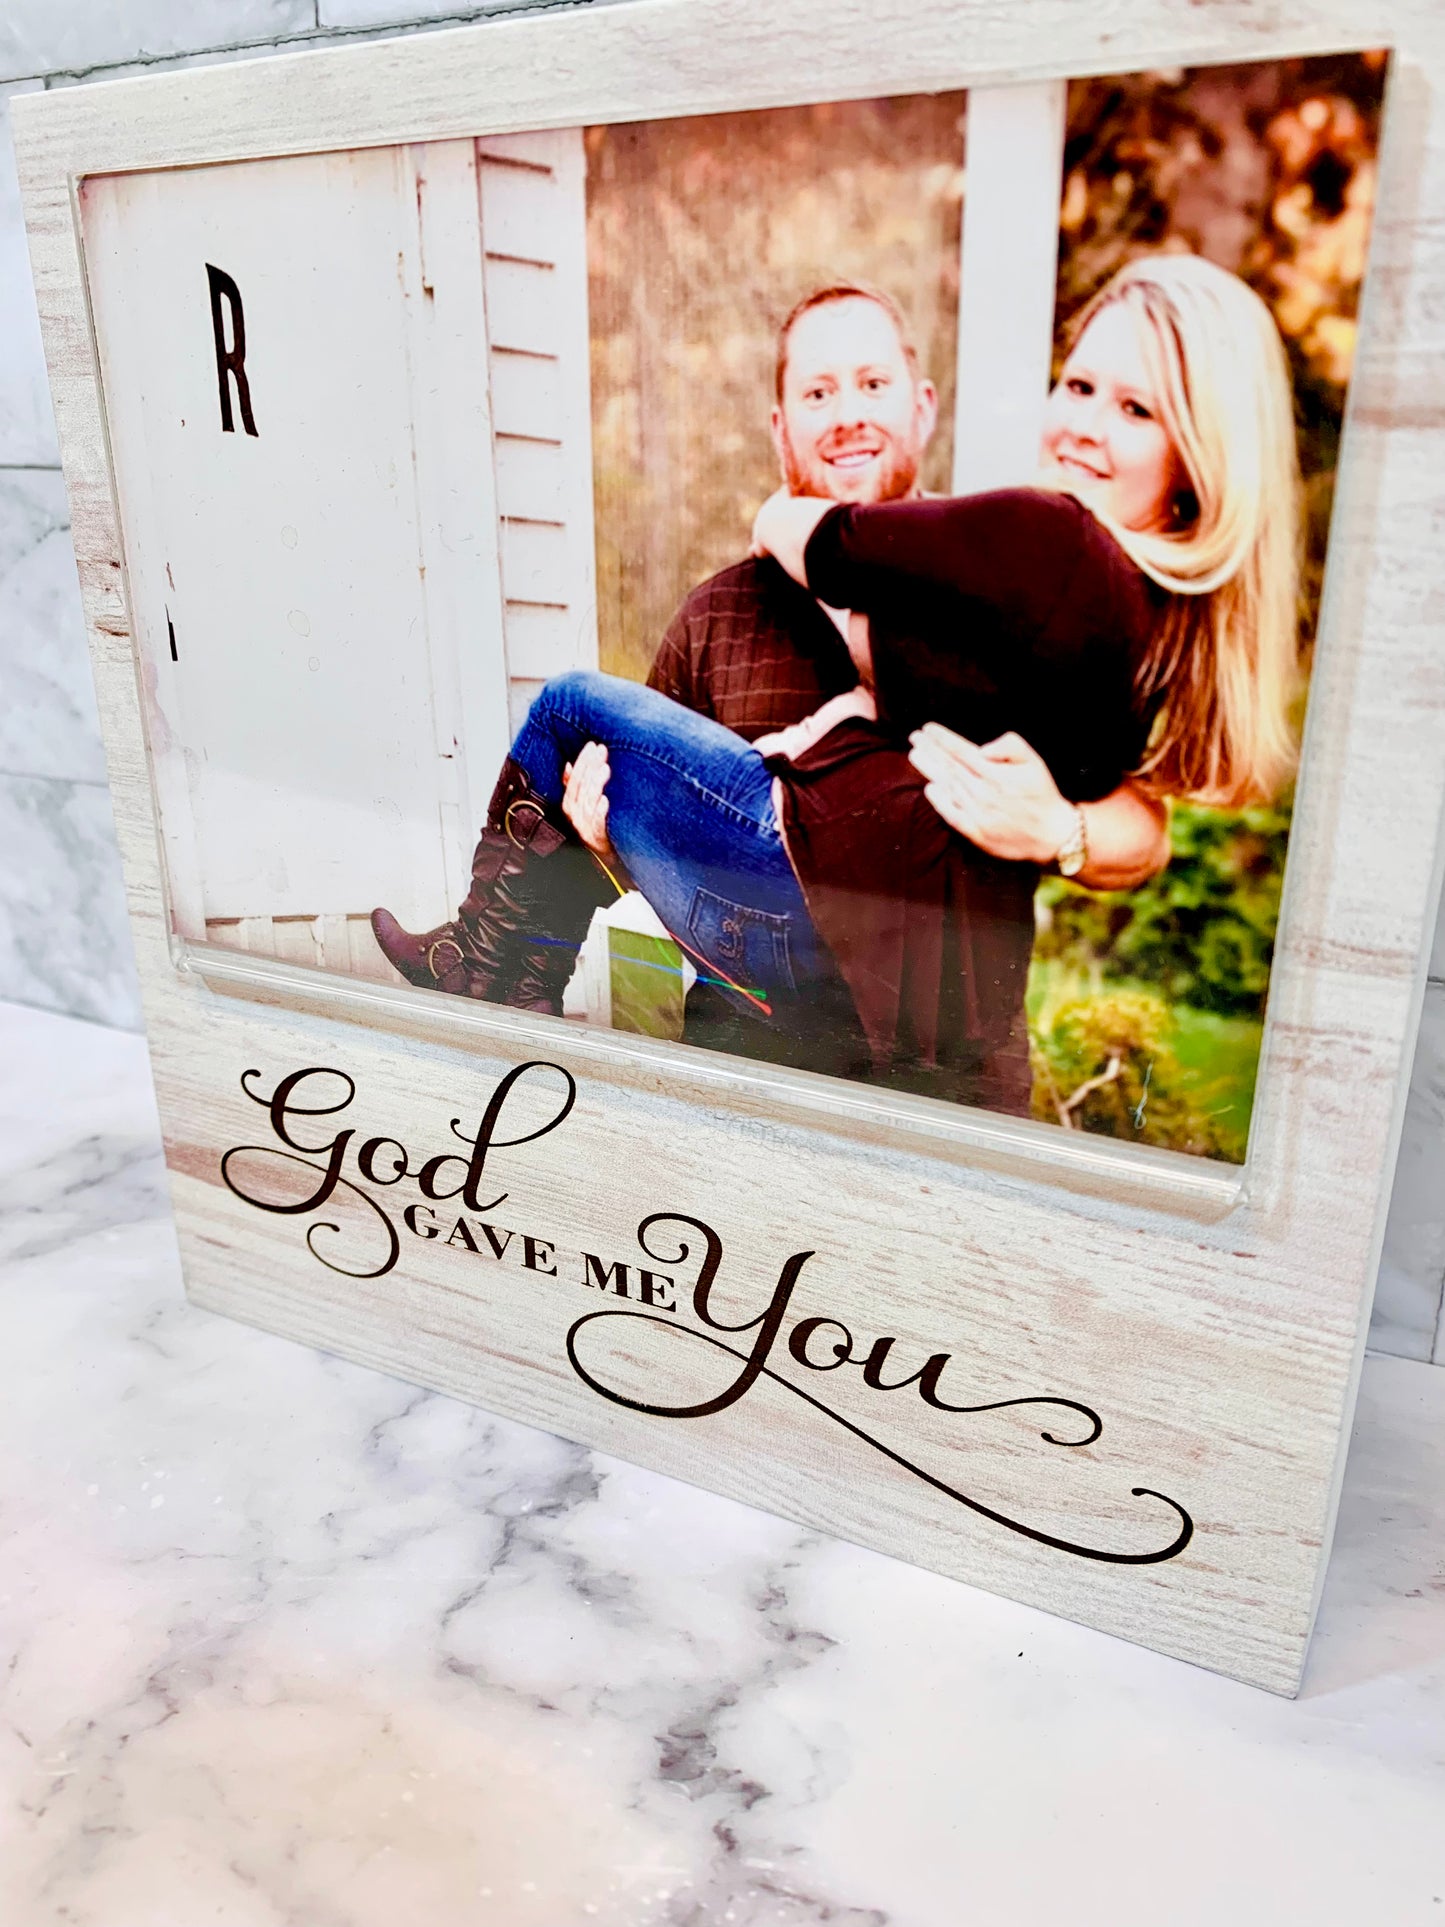 God Gave Me You Picture Frame 4x6